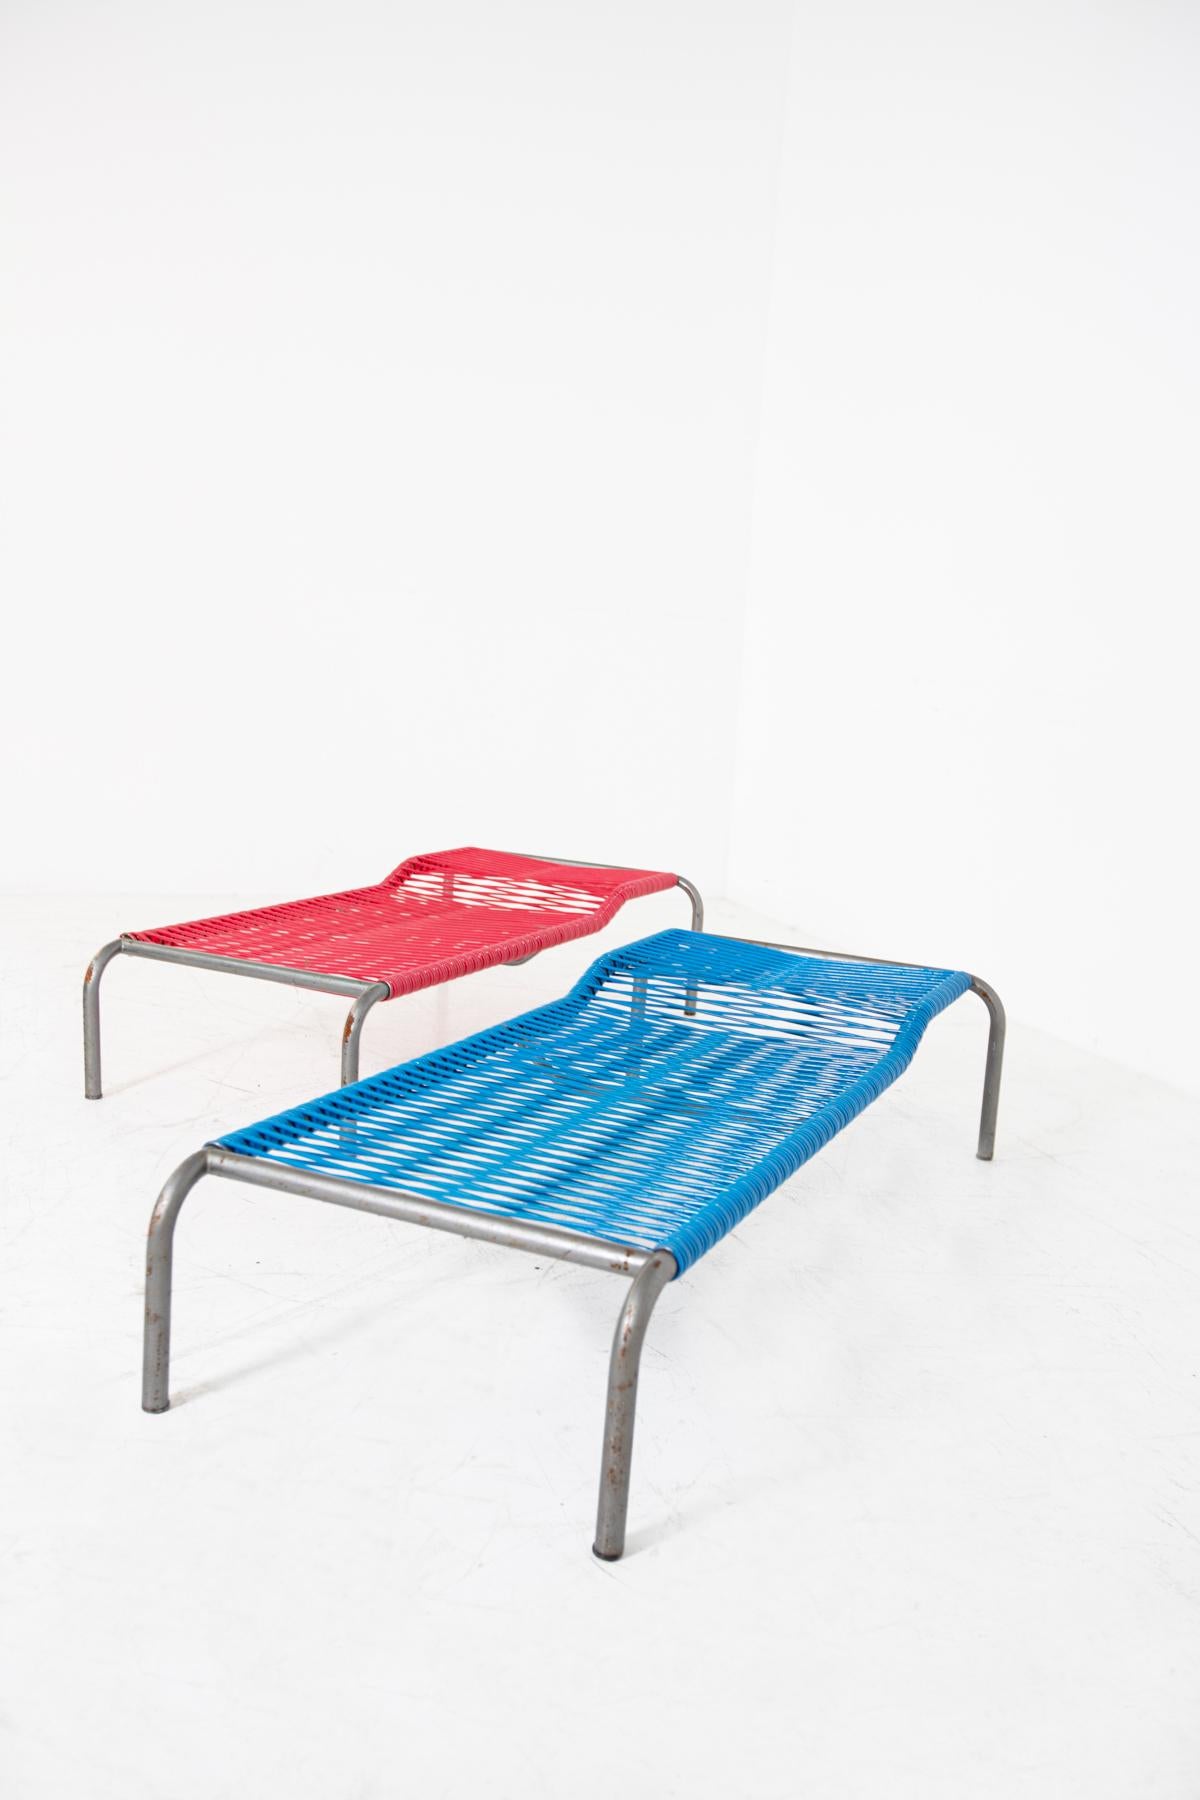 Pair of Italian Iron and Plastic Deckchairs Red and Blue 4